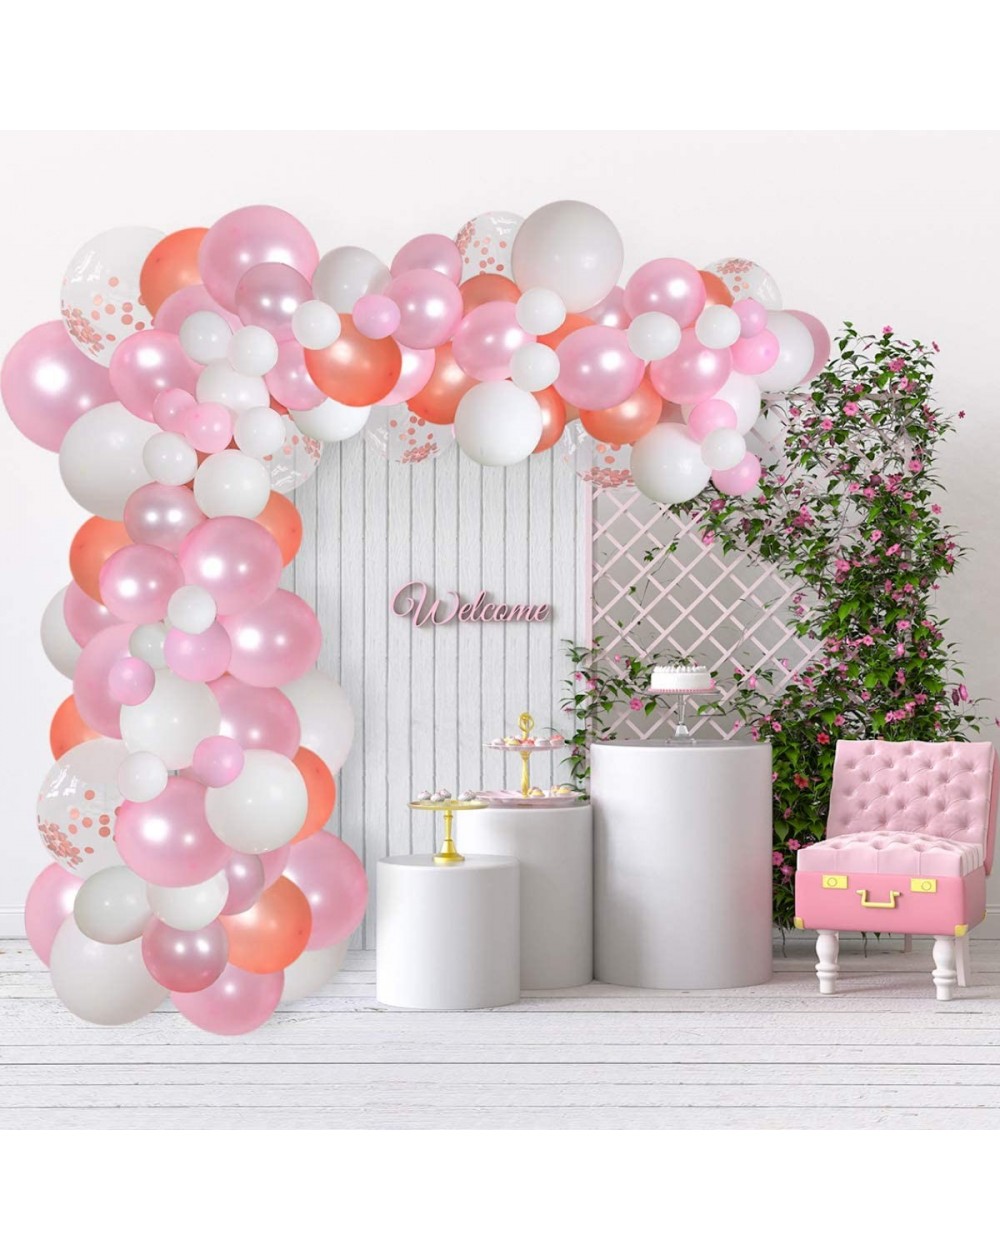 Balloons Balloon Garland Arch Kit - Rose Gold Pink and White Balloon Garland with Inflator Pump - for Baby Shower- Wedding an...